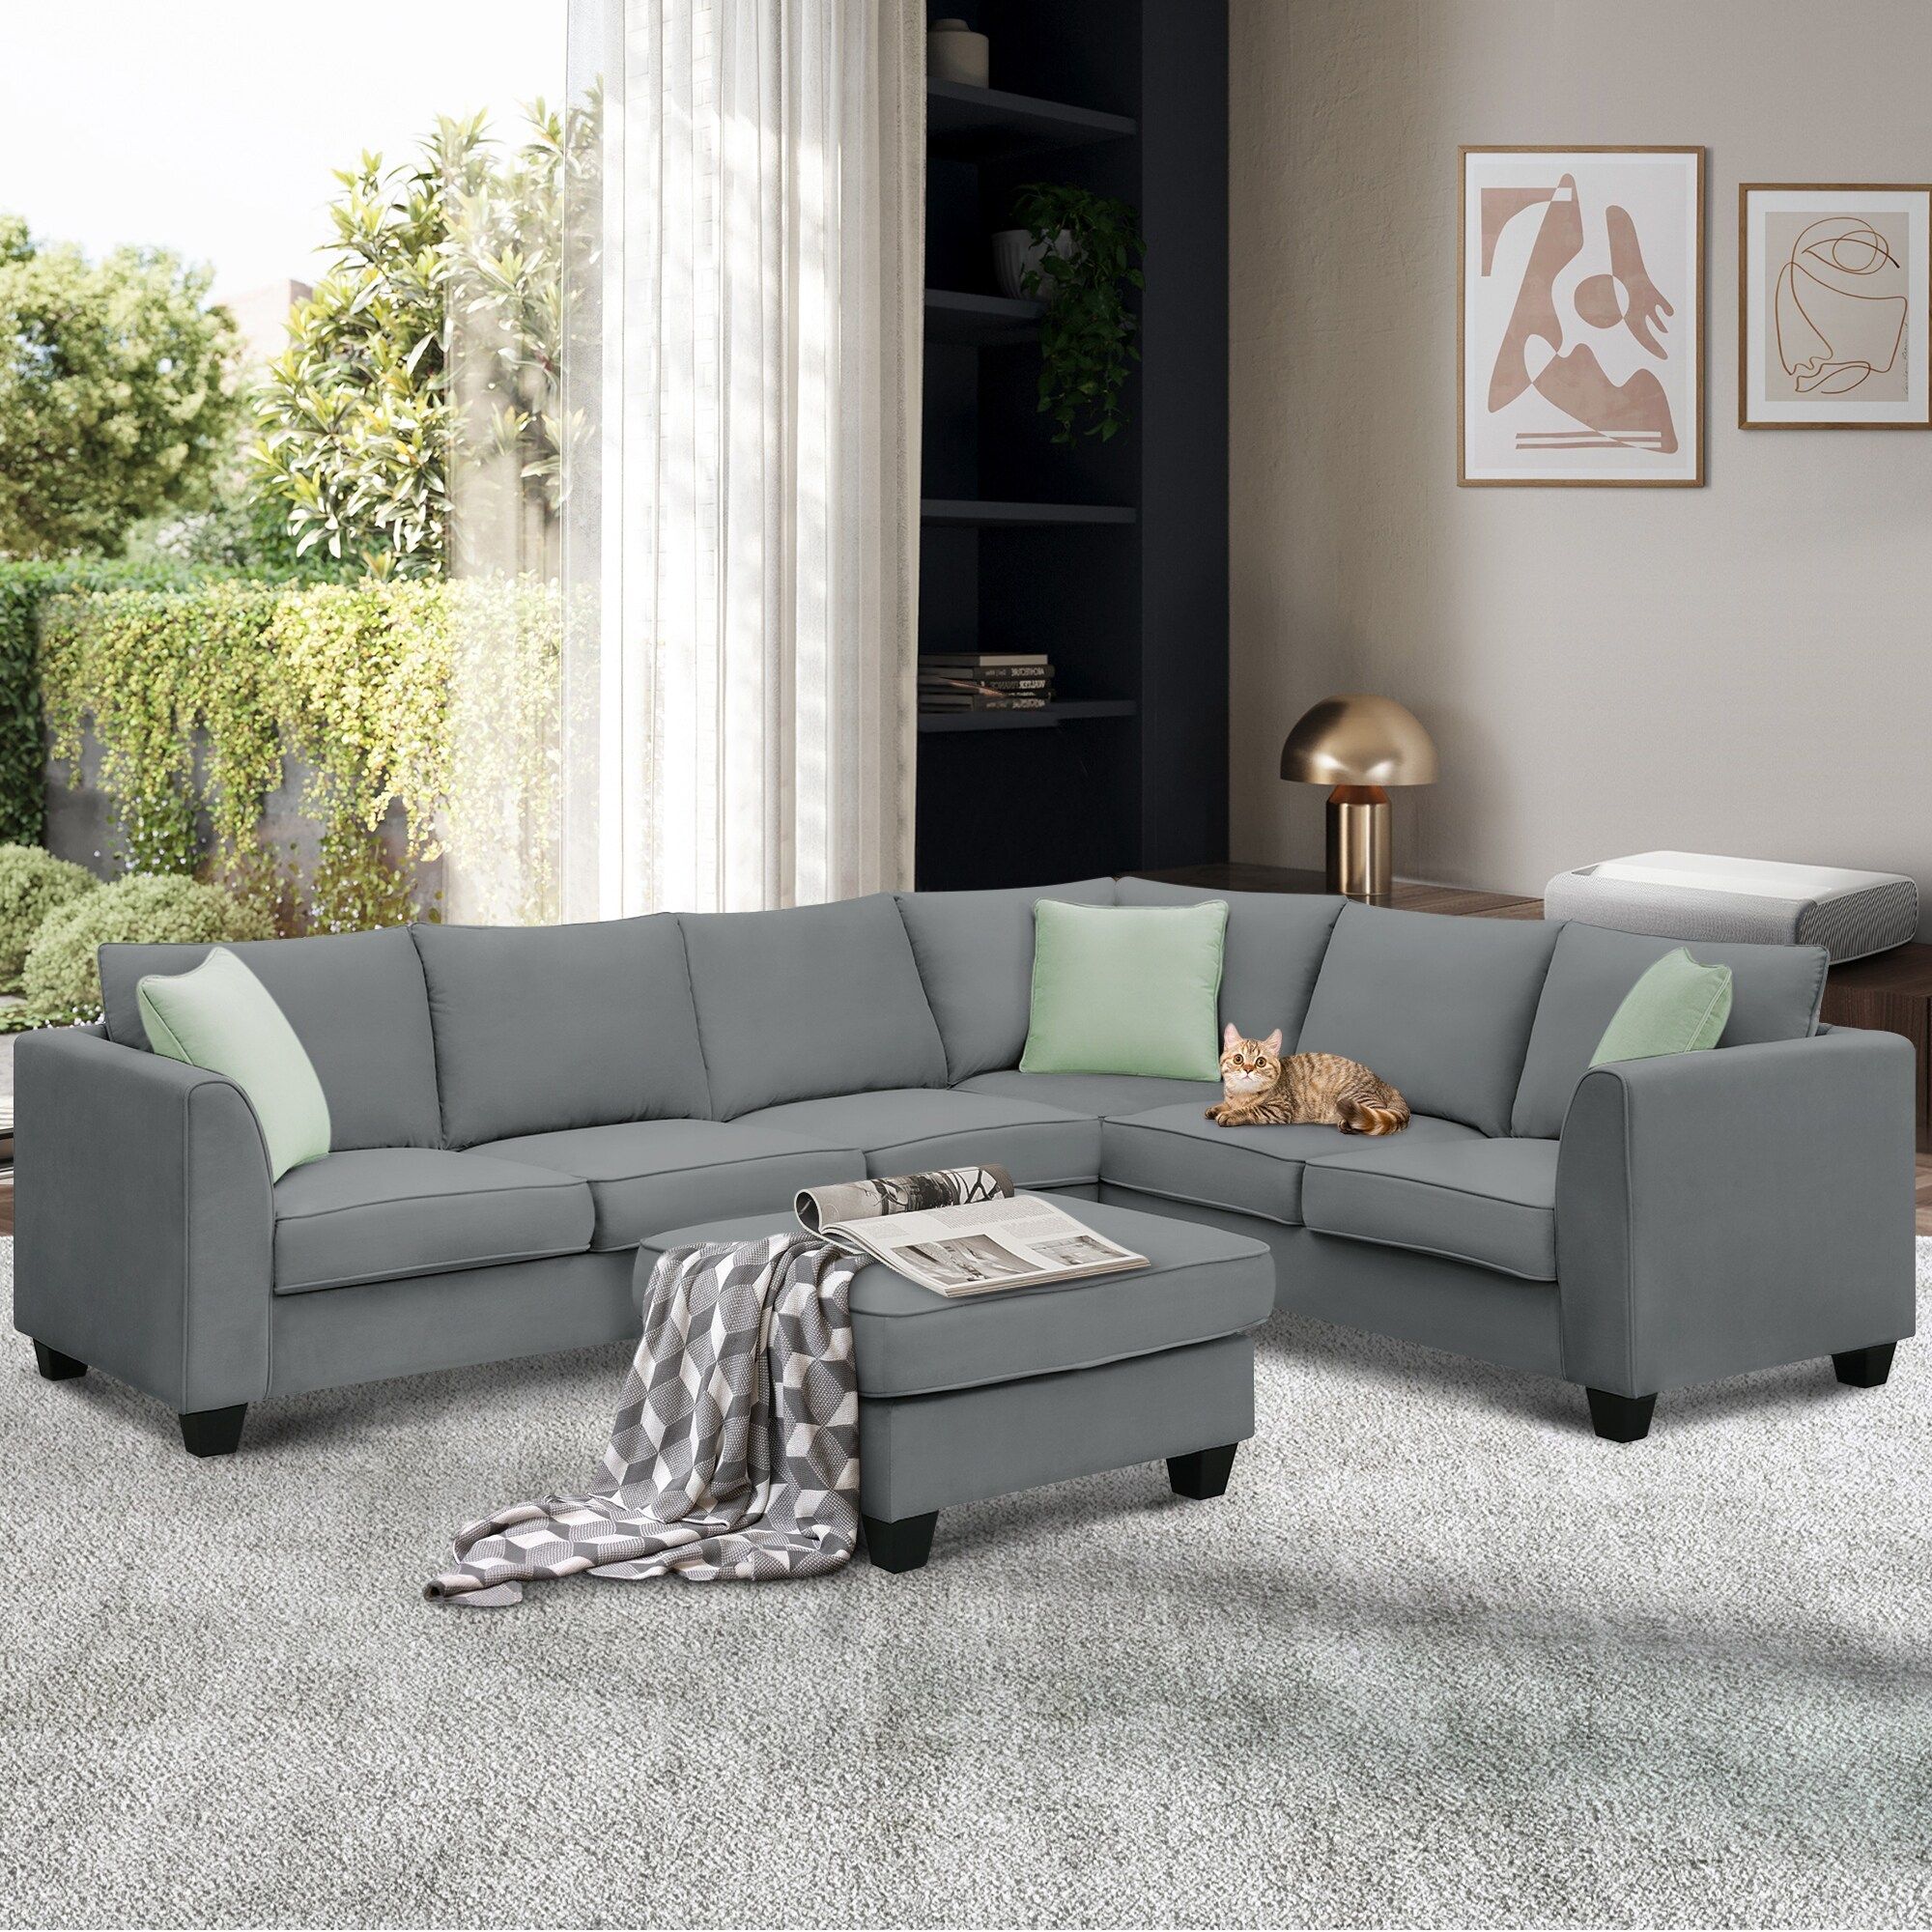 112" Sectional Sofa Couches Living Room Sets 7 Seats Sleeper Sofa With  Ottoman, L Shape Fabric Sofa, Pillow Back Sofa – – 37989197 Throughout Pillowback Sofa Sectionals (Photo 13 of 15)